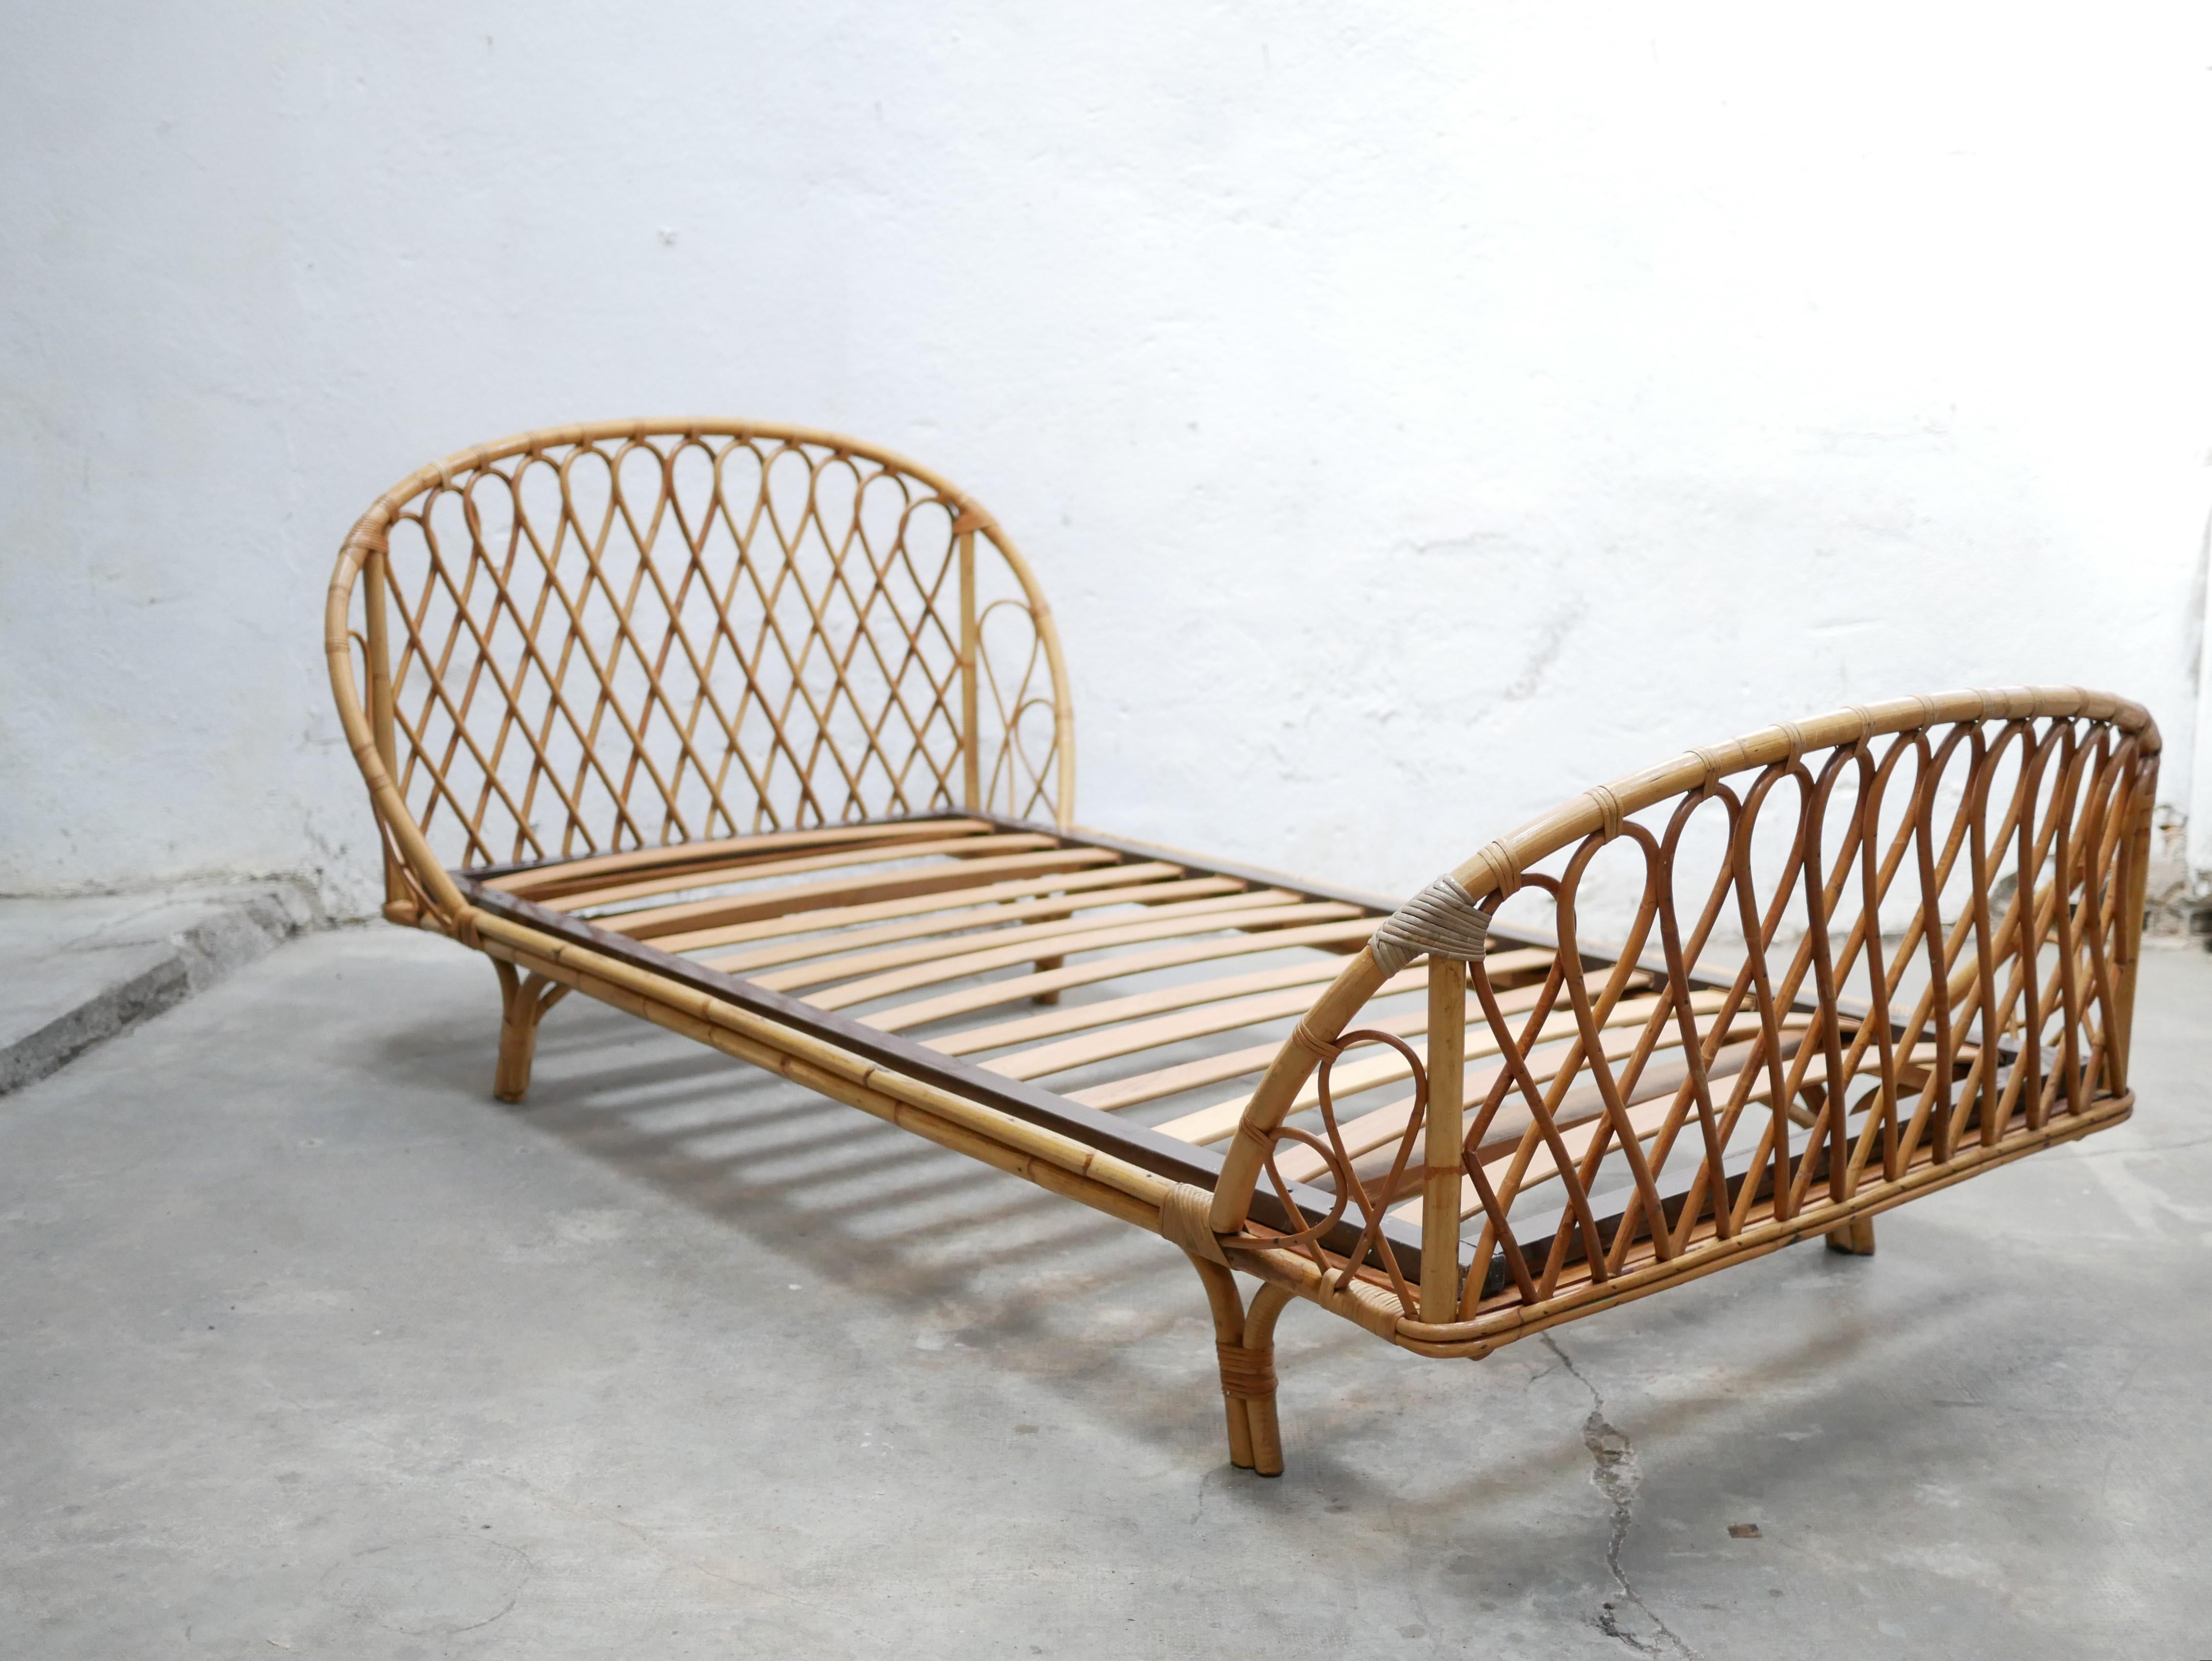 Rattan bed from the 60s.

Aesthetic and trendy, it will bring a vintage and bohemian touch to the decoration. Rattan is bright and warm.

(Free box spring if desired).

Good condition, slight marks of time.

Dimensions:

For a mattress 90cm x